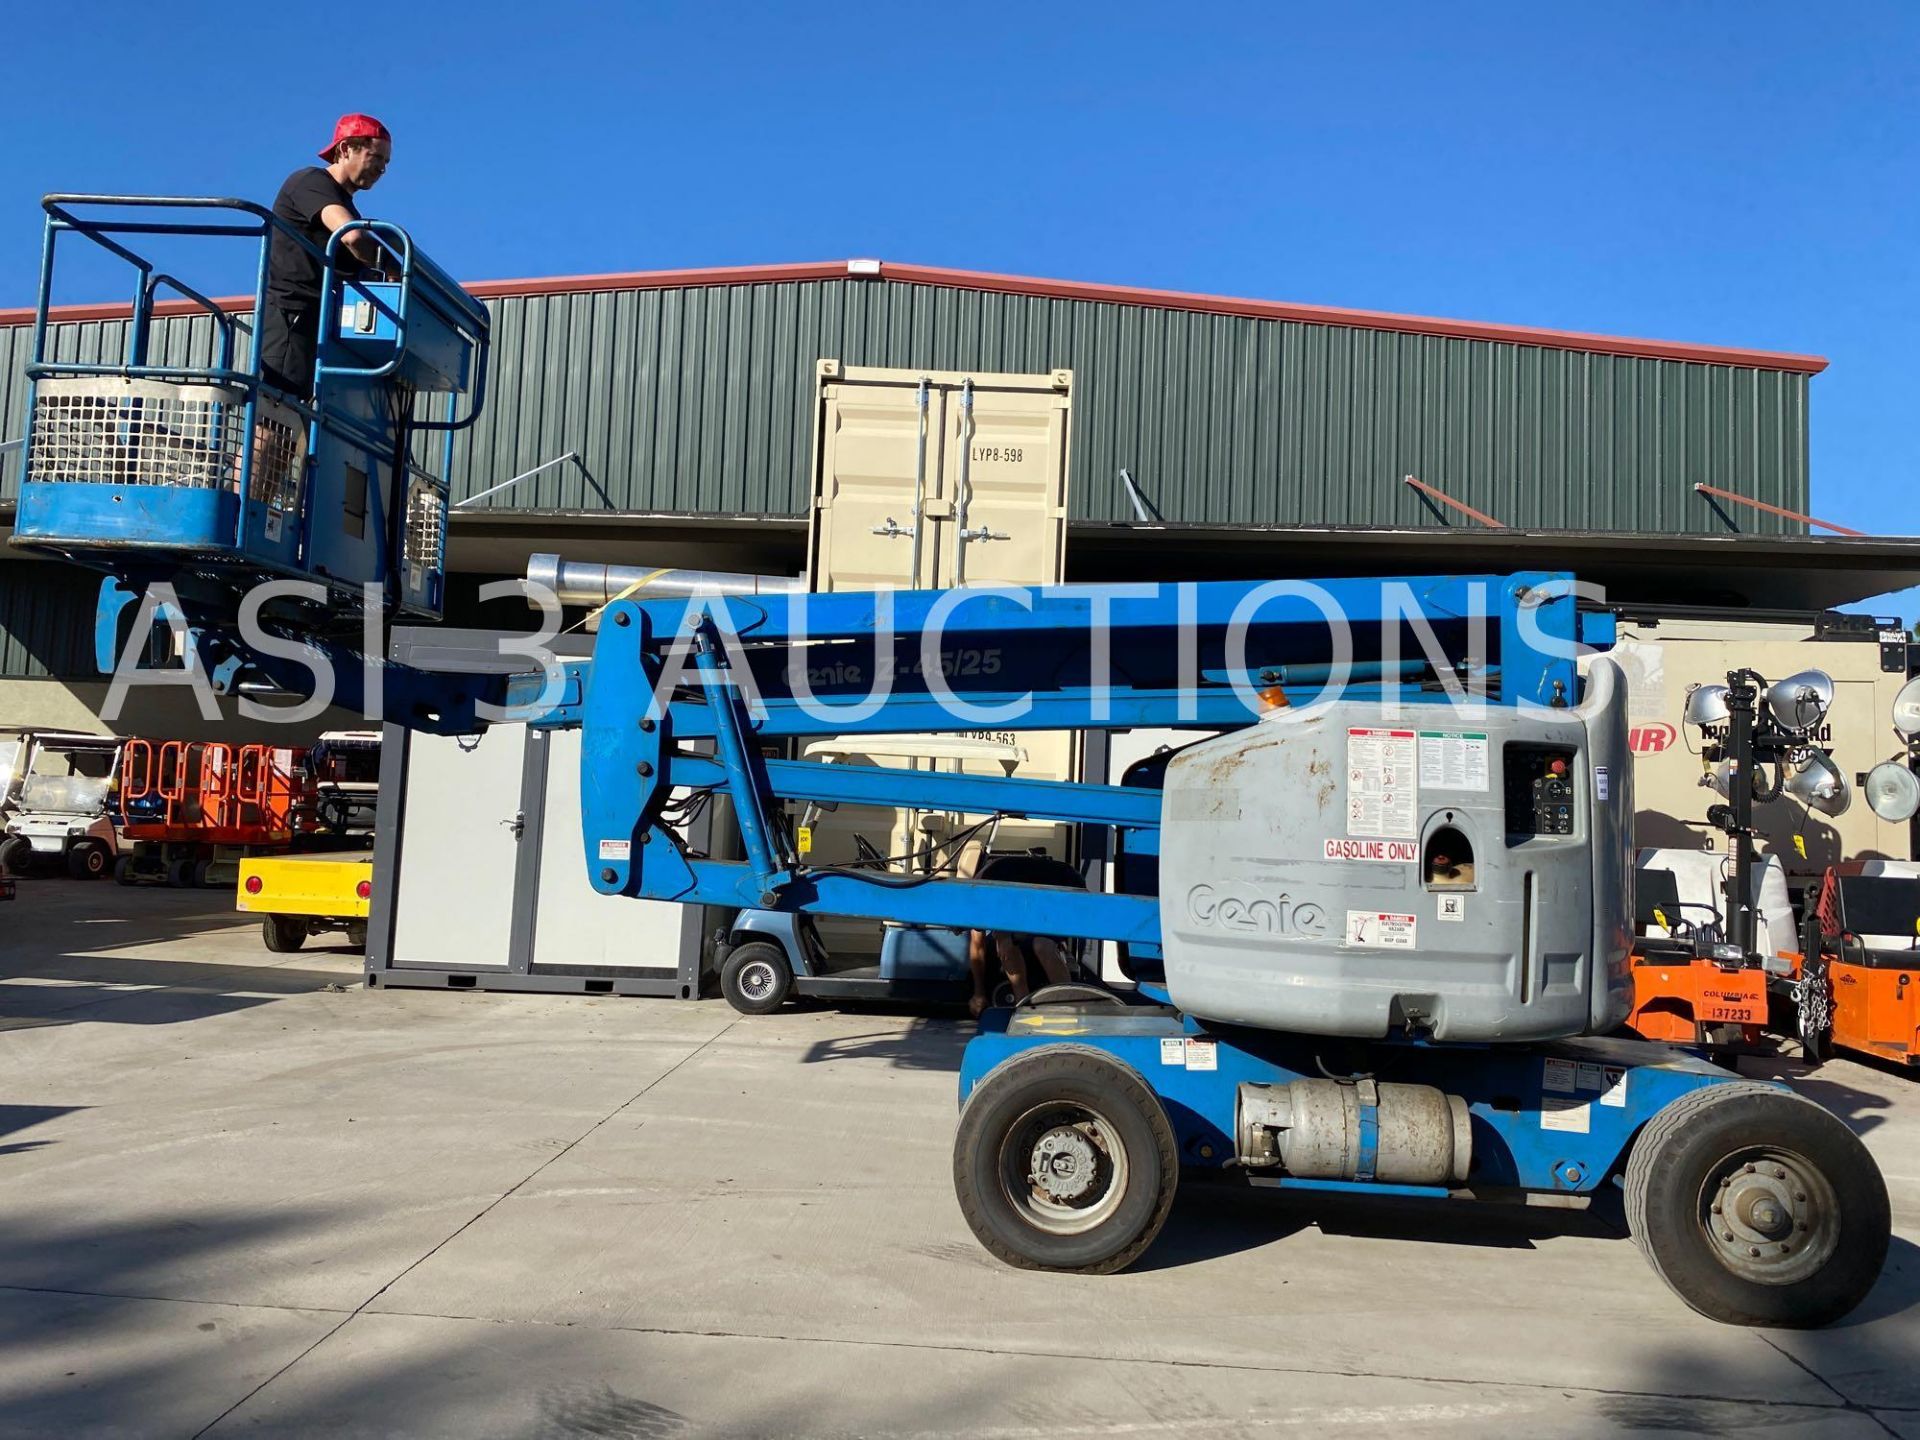 GENIE Z-45/25 DUAL FUEL ARTICULATING BOOM LIFT, FOAM FILLED TIRES, EXTRA WEIGHT UNDERNEATH, 45 - Image 6 of 17